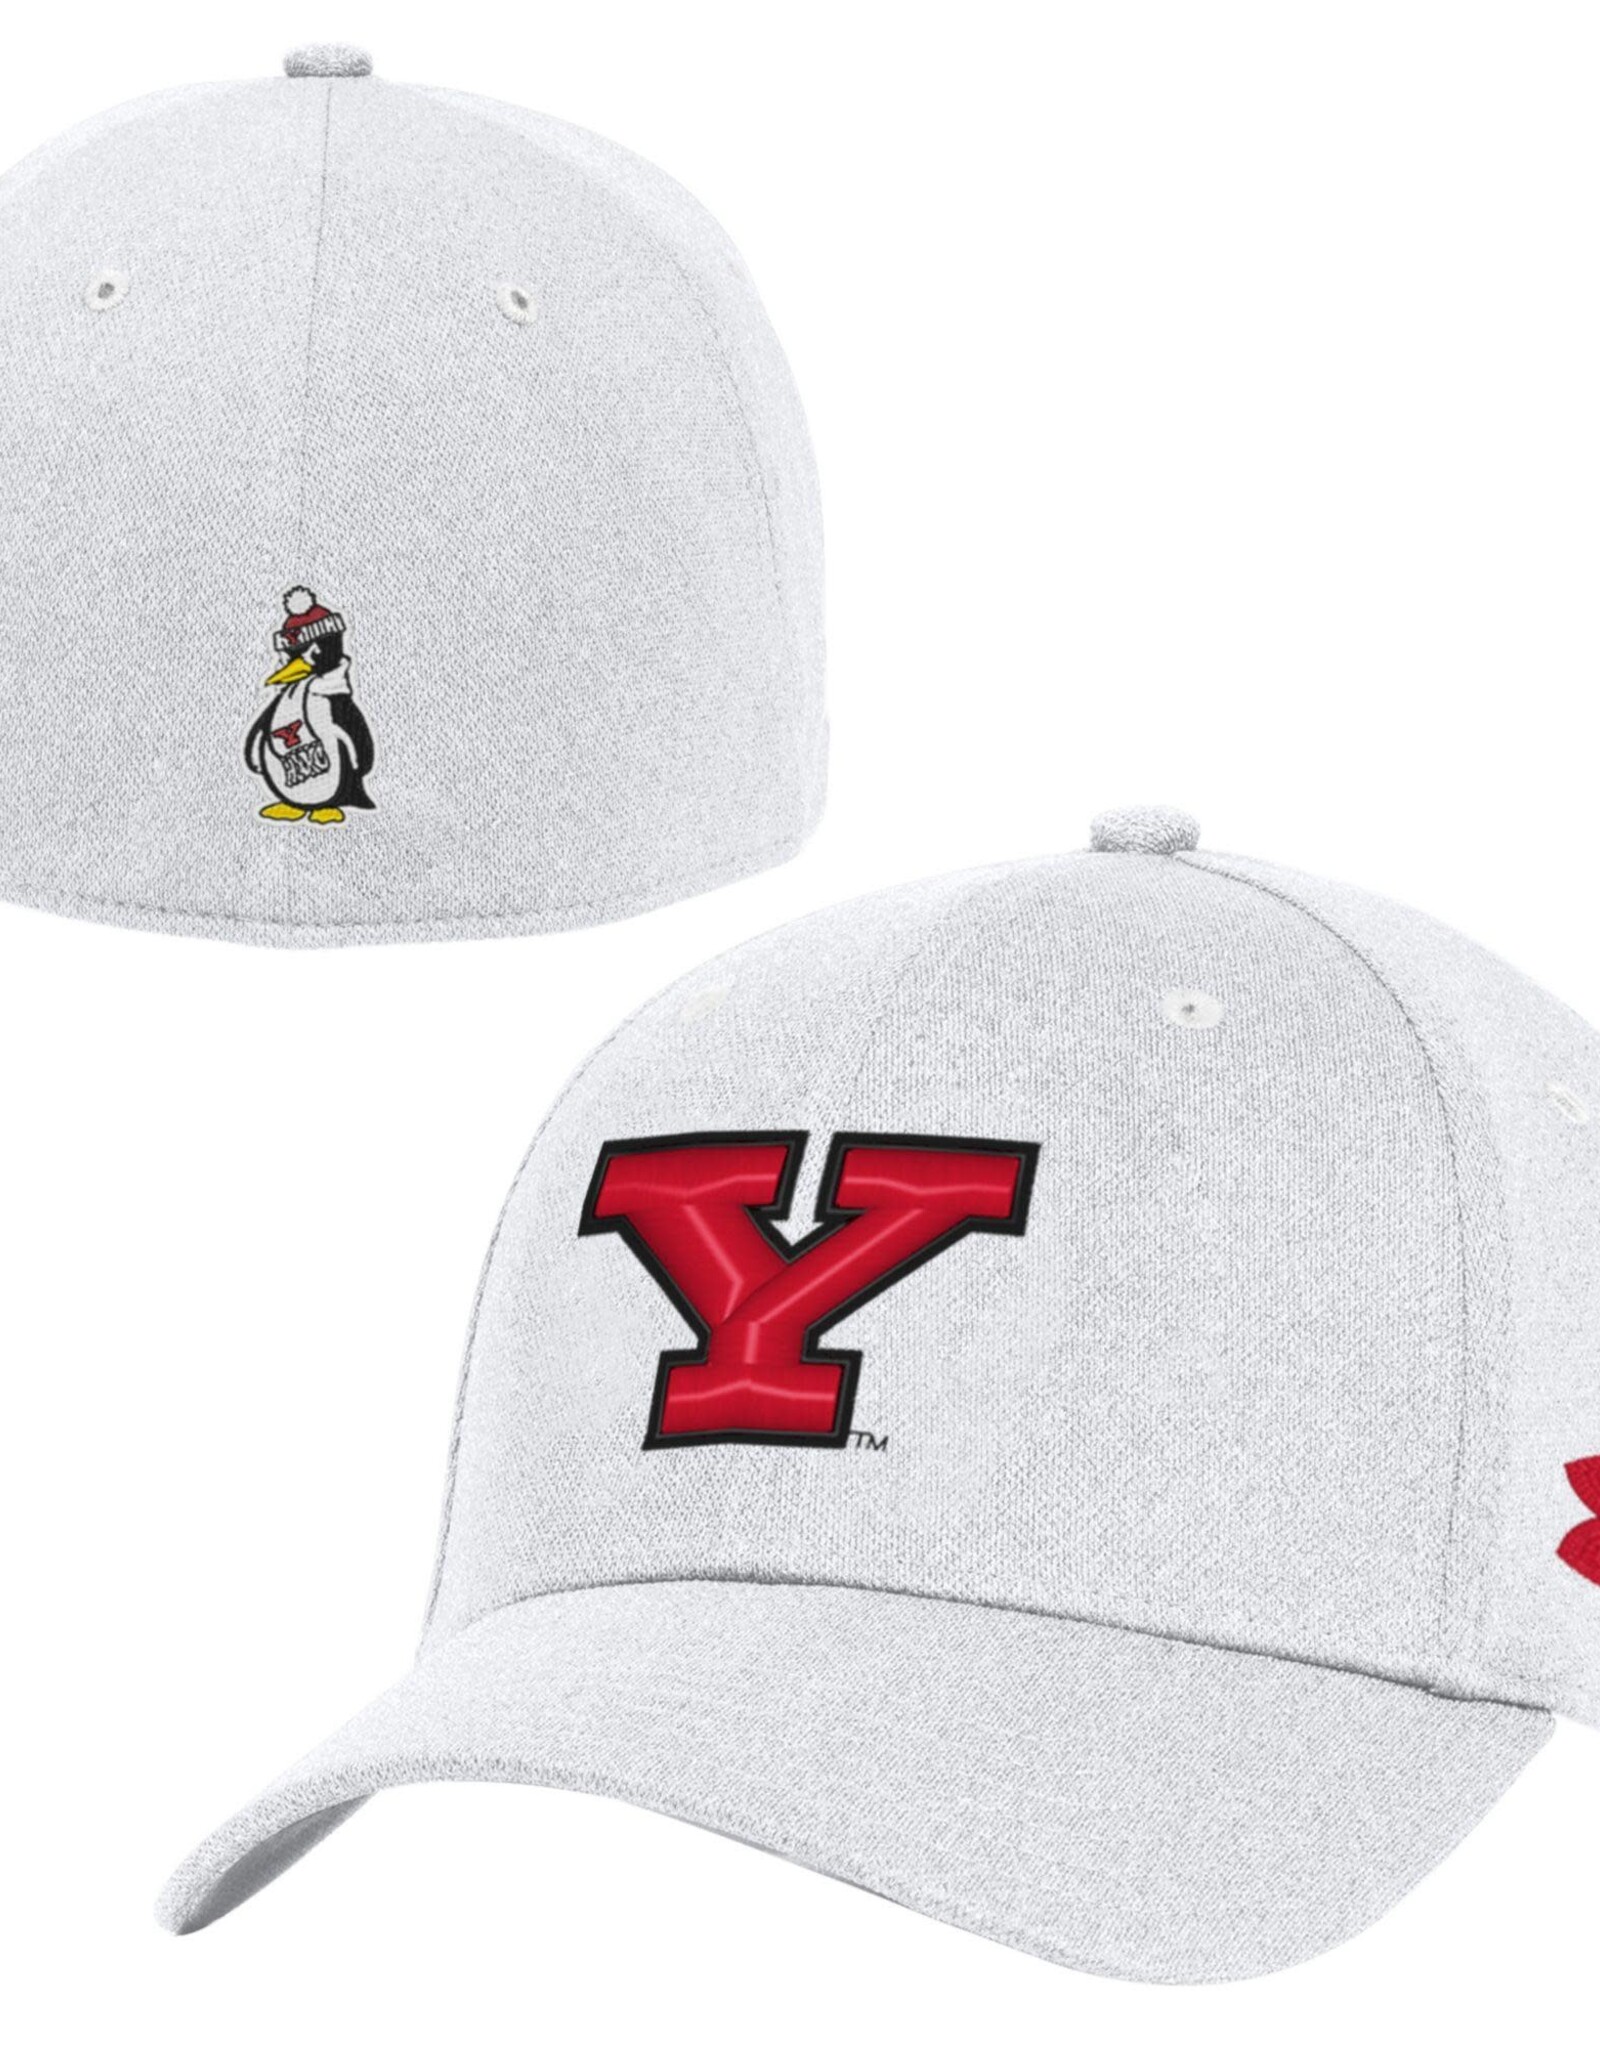 Under Armour Youngstown State Penguins White Blitzing Stretch Fit Cap - RED Y LOGO w/PETE